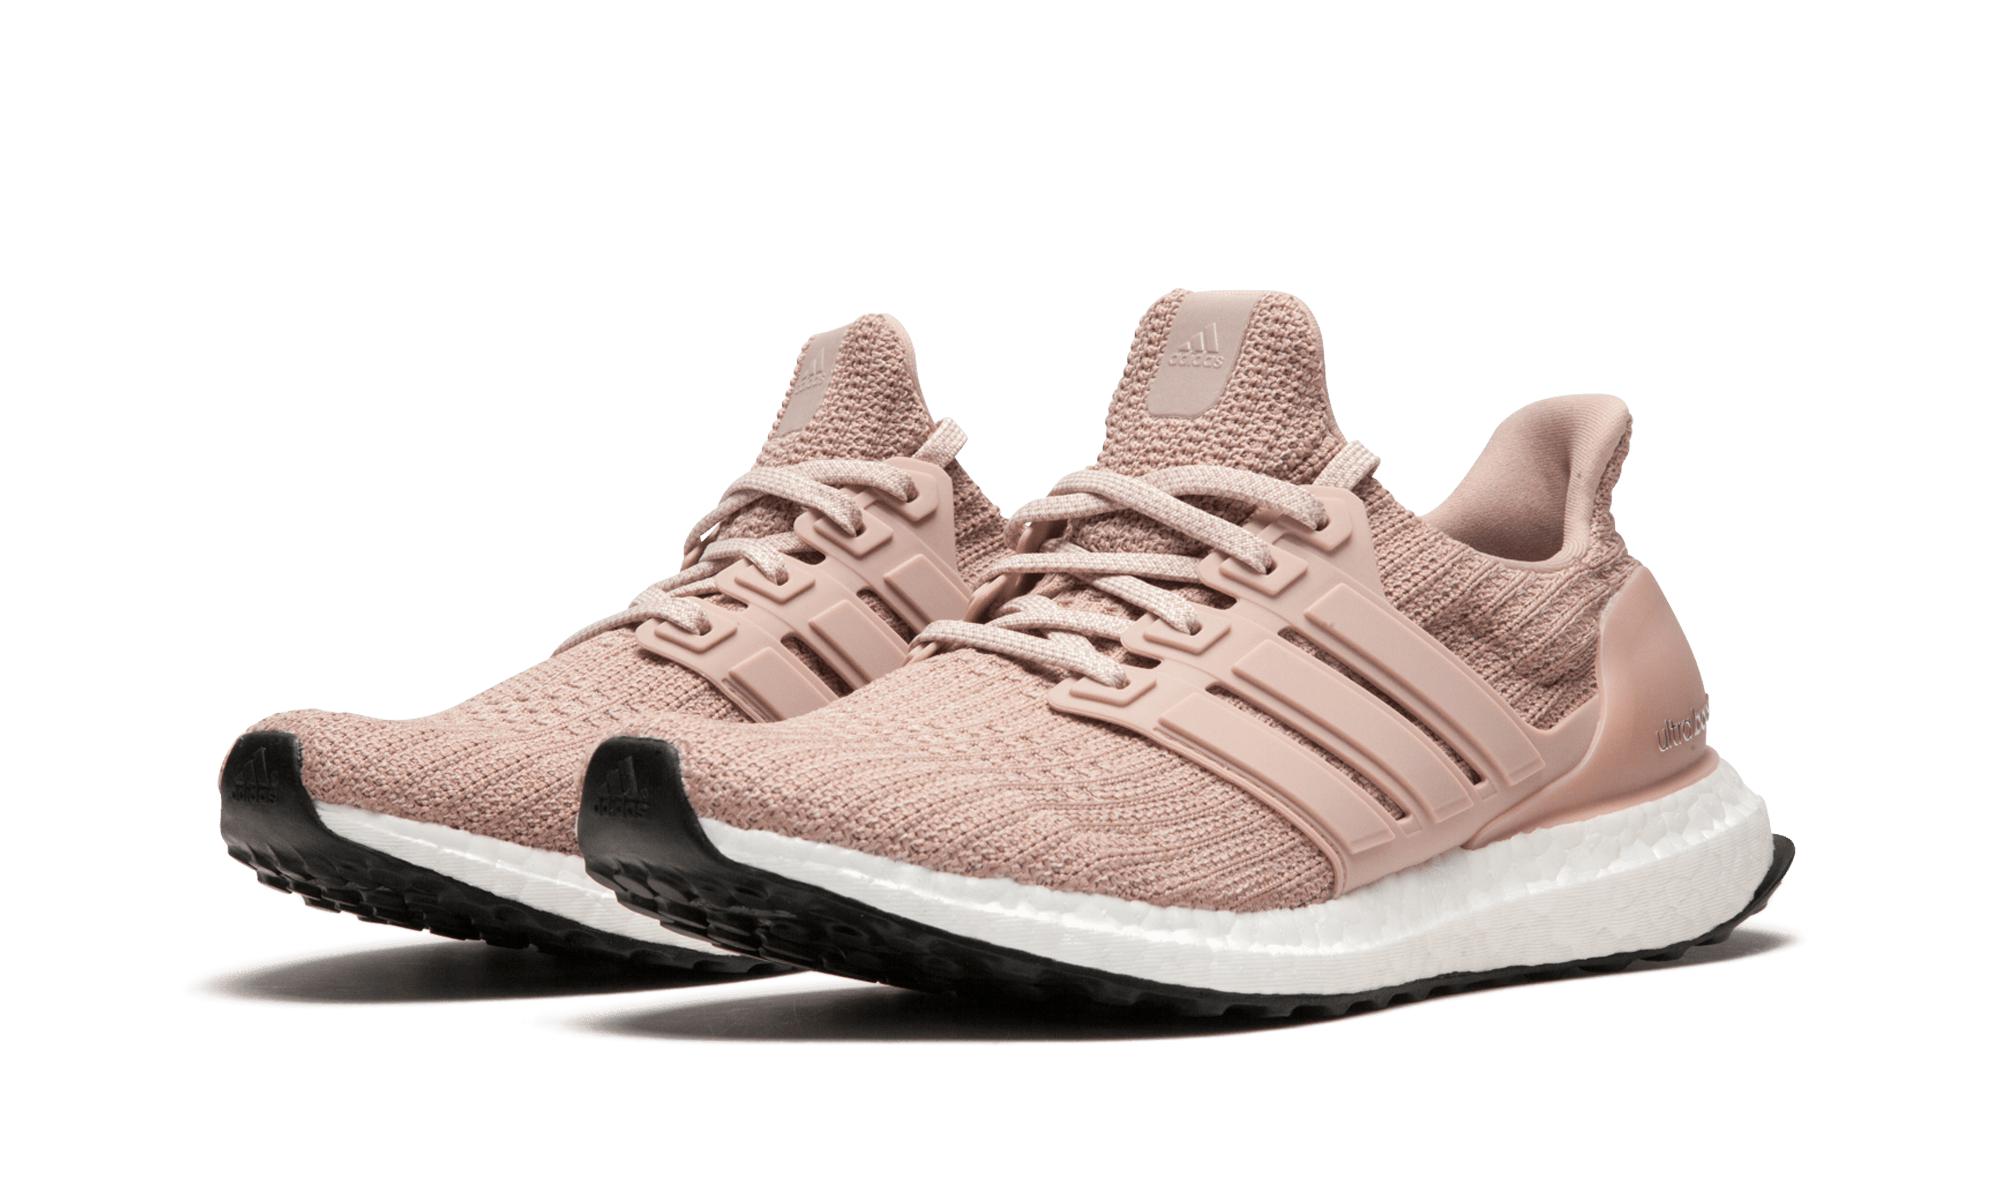 adidas Ultraboost W in Rose (Pink) for Men - Lyst